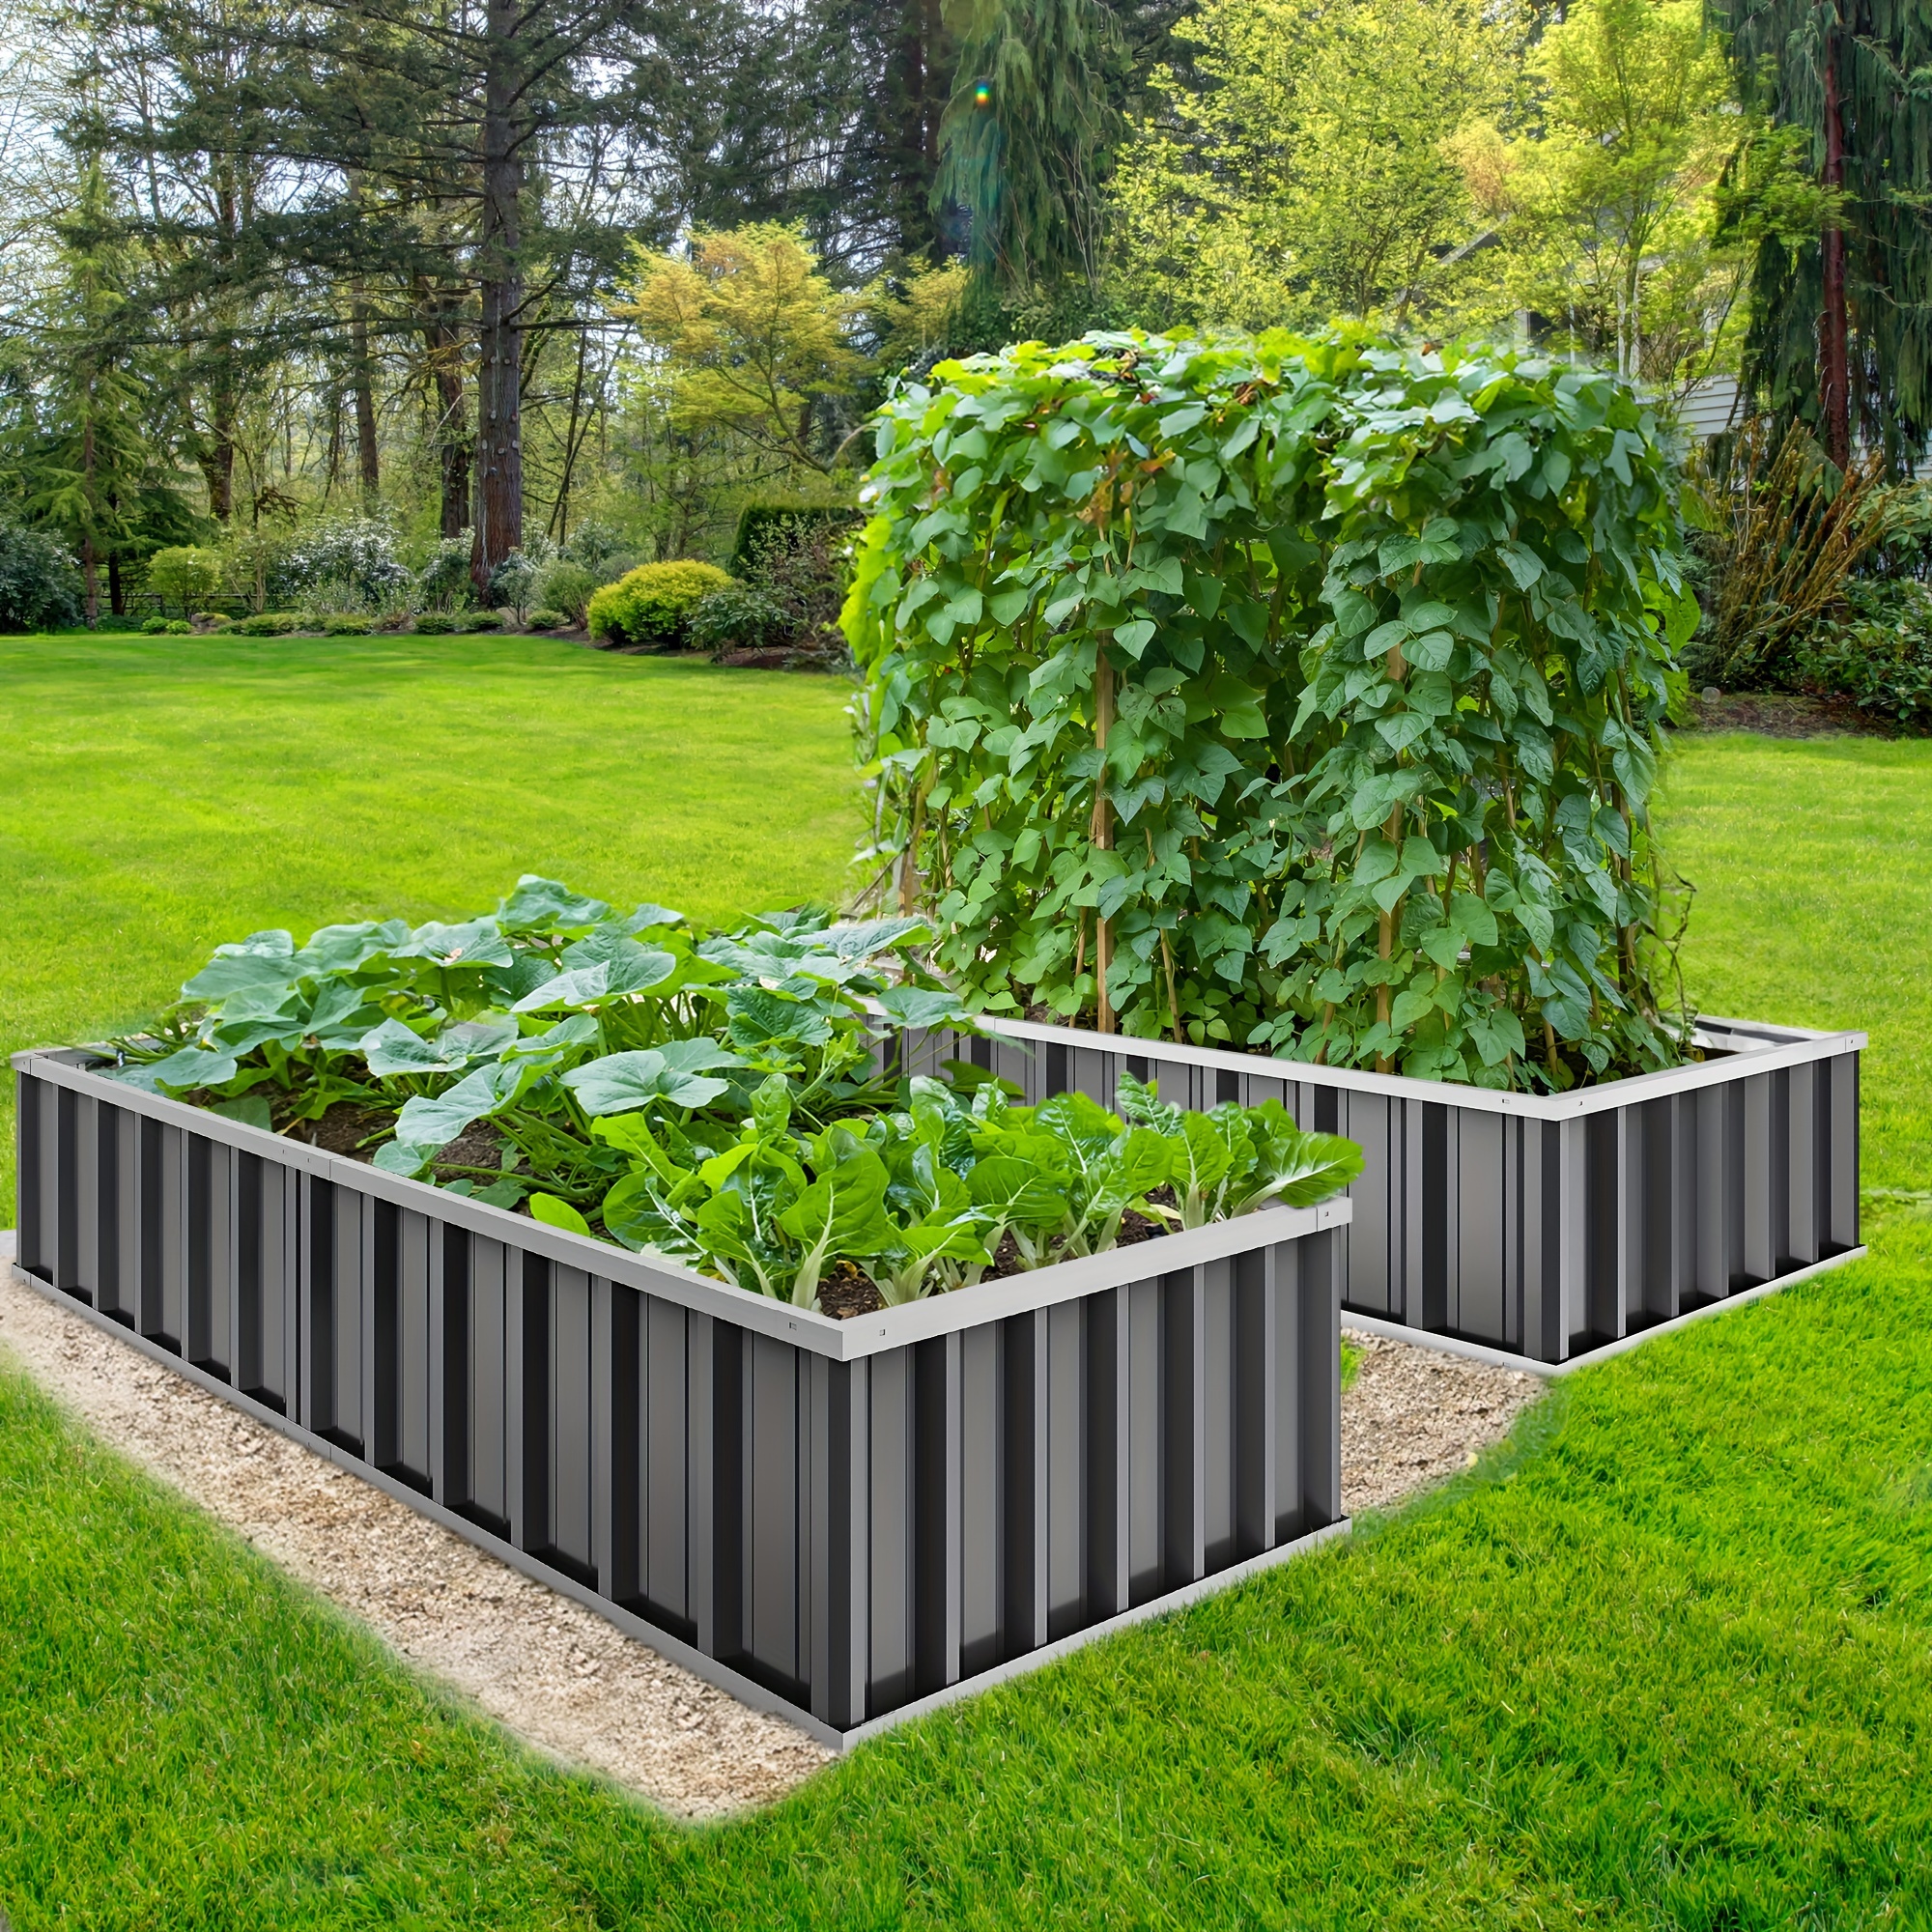 

68.5"x35.4"x23.6" Raised Garden Bed Kit, Large Outdoor Galvanized Metal Patio Planter Box With 2 Gloves For Plants Vegetables Flowers